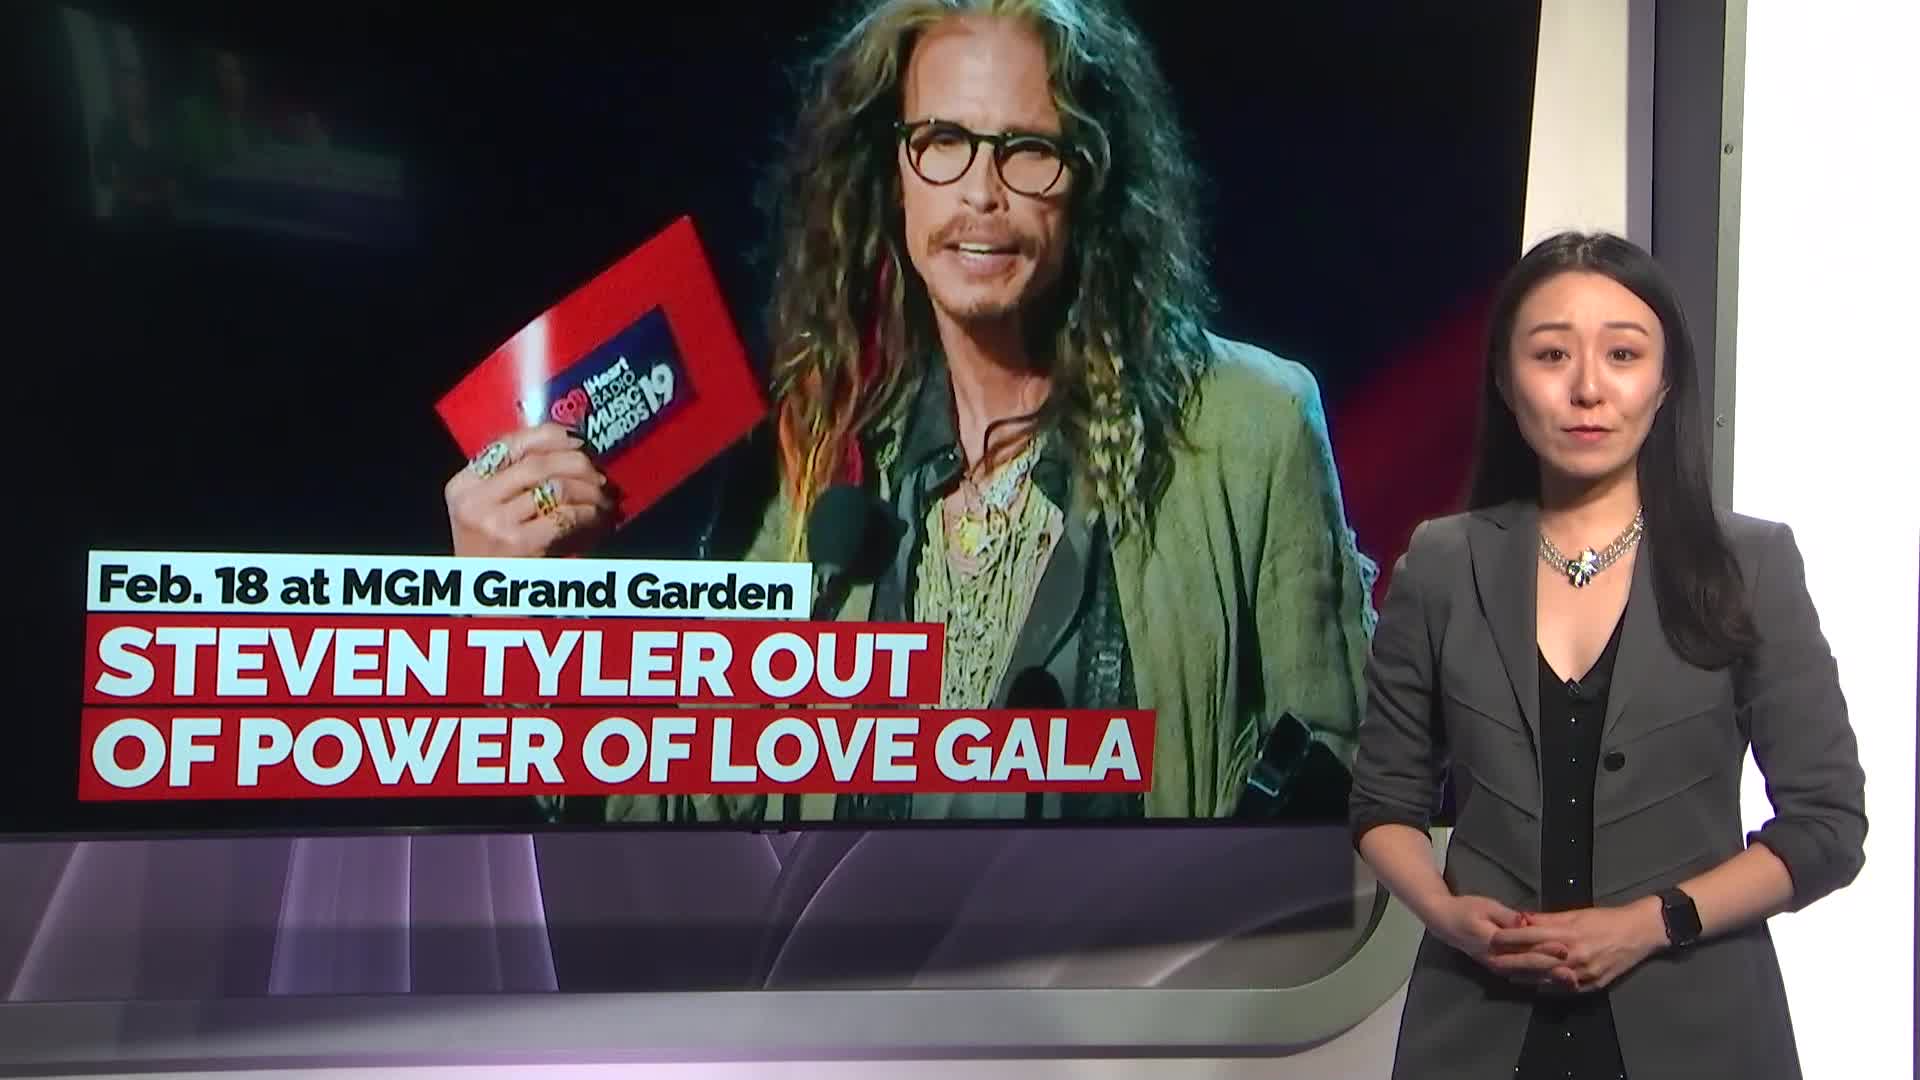 Steven Tyler out of upcoming gala